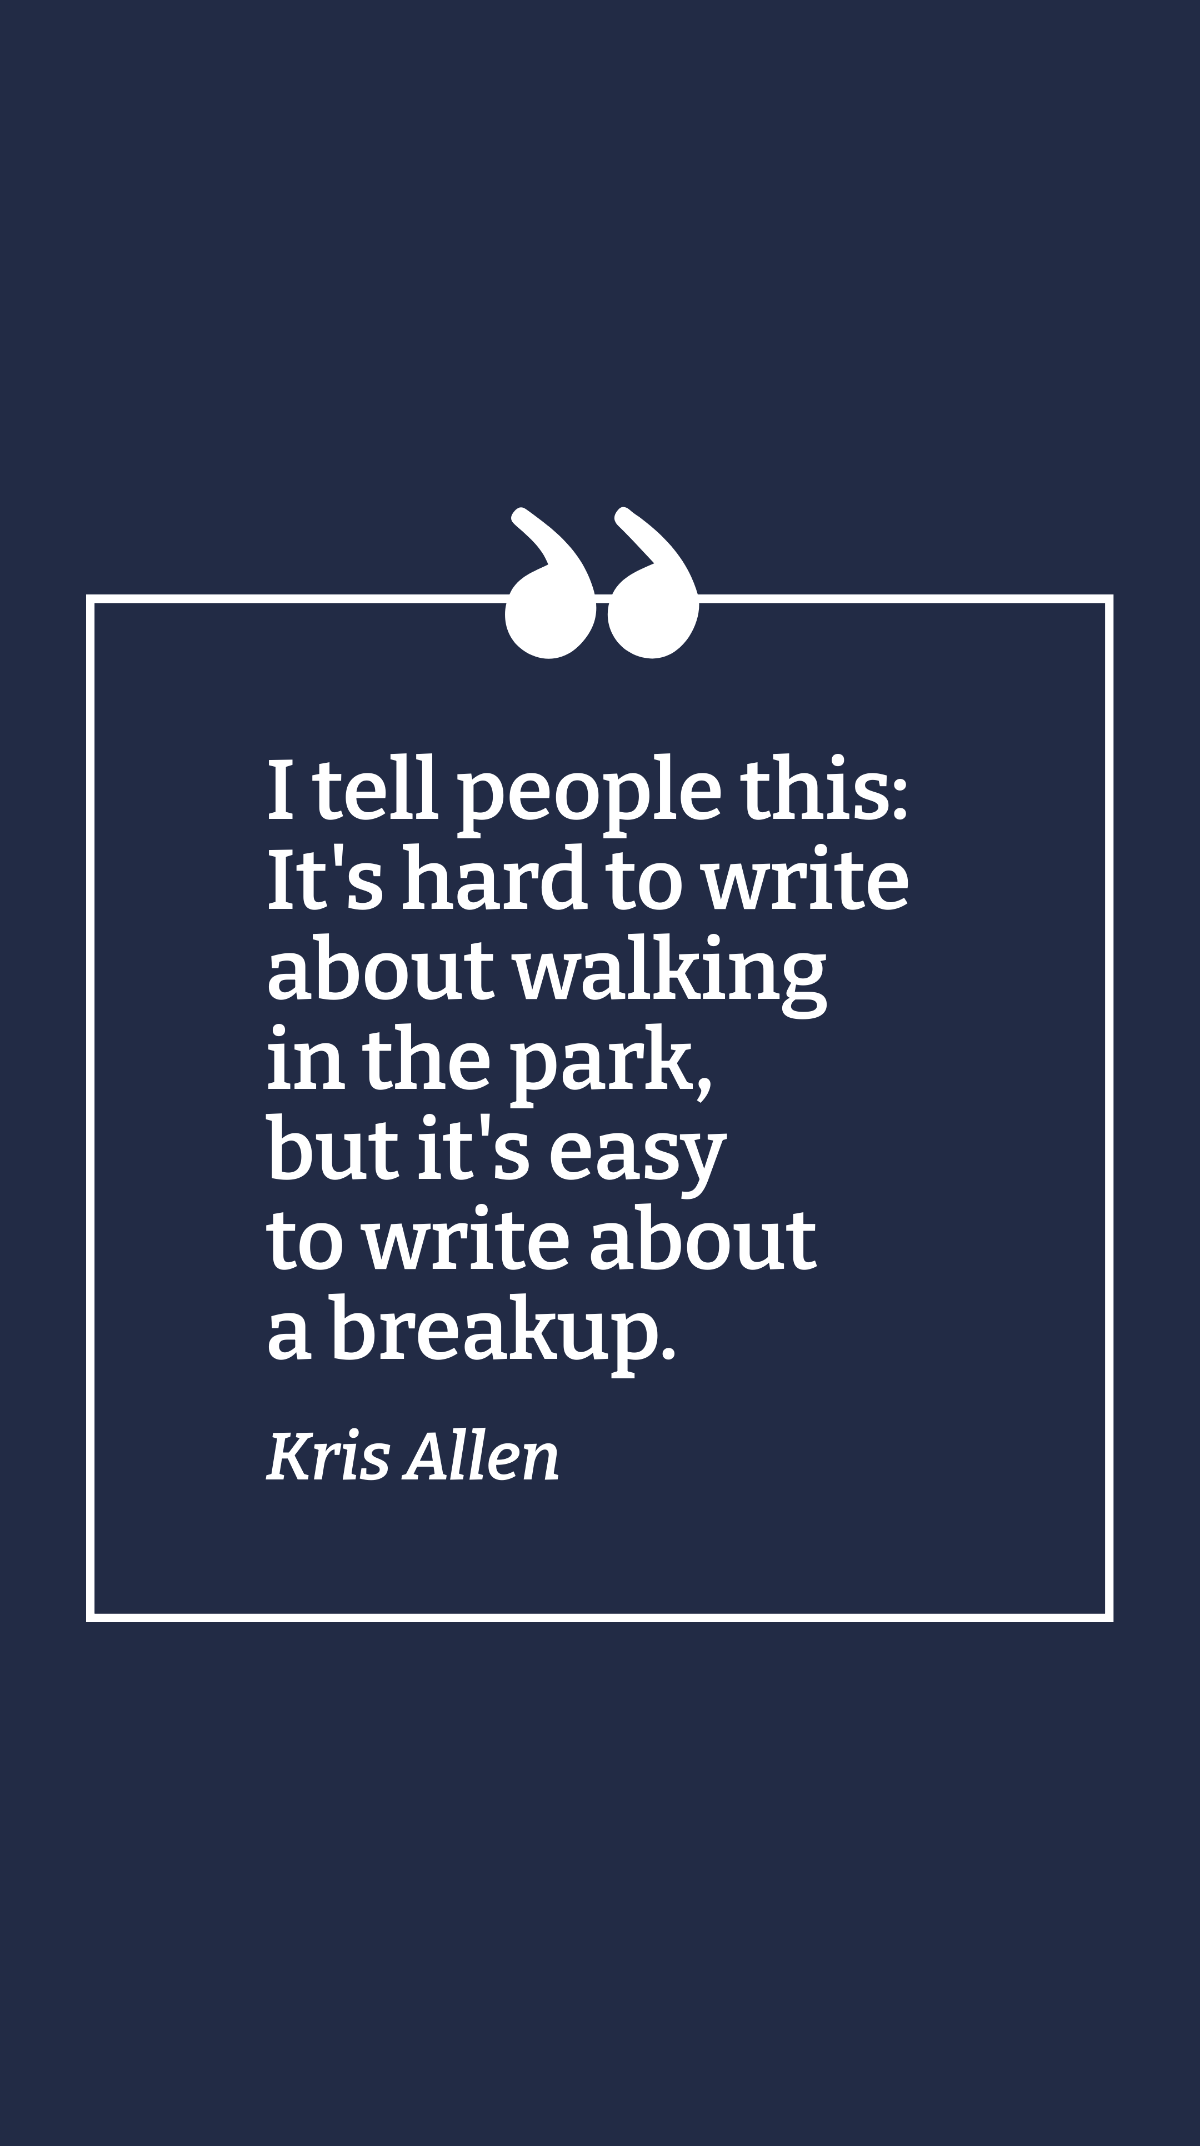 Kris Allen - I tell people this: It's hard to write about walking in the park, but it's easy to write about a breakup.